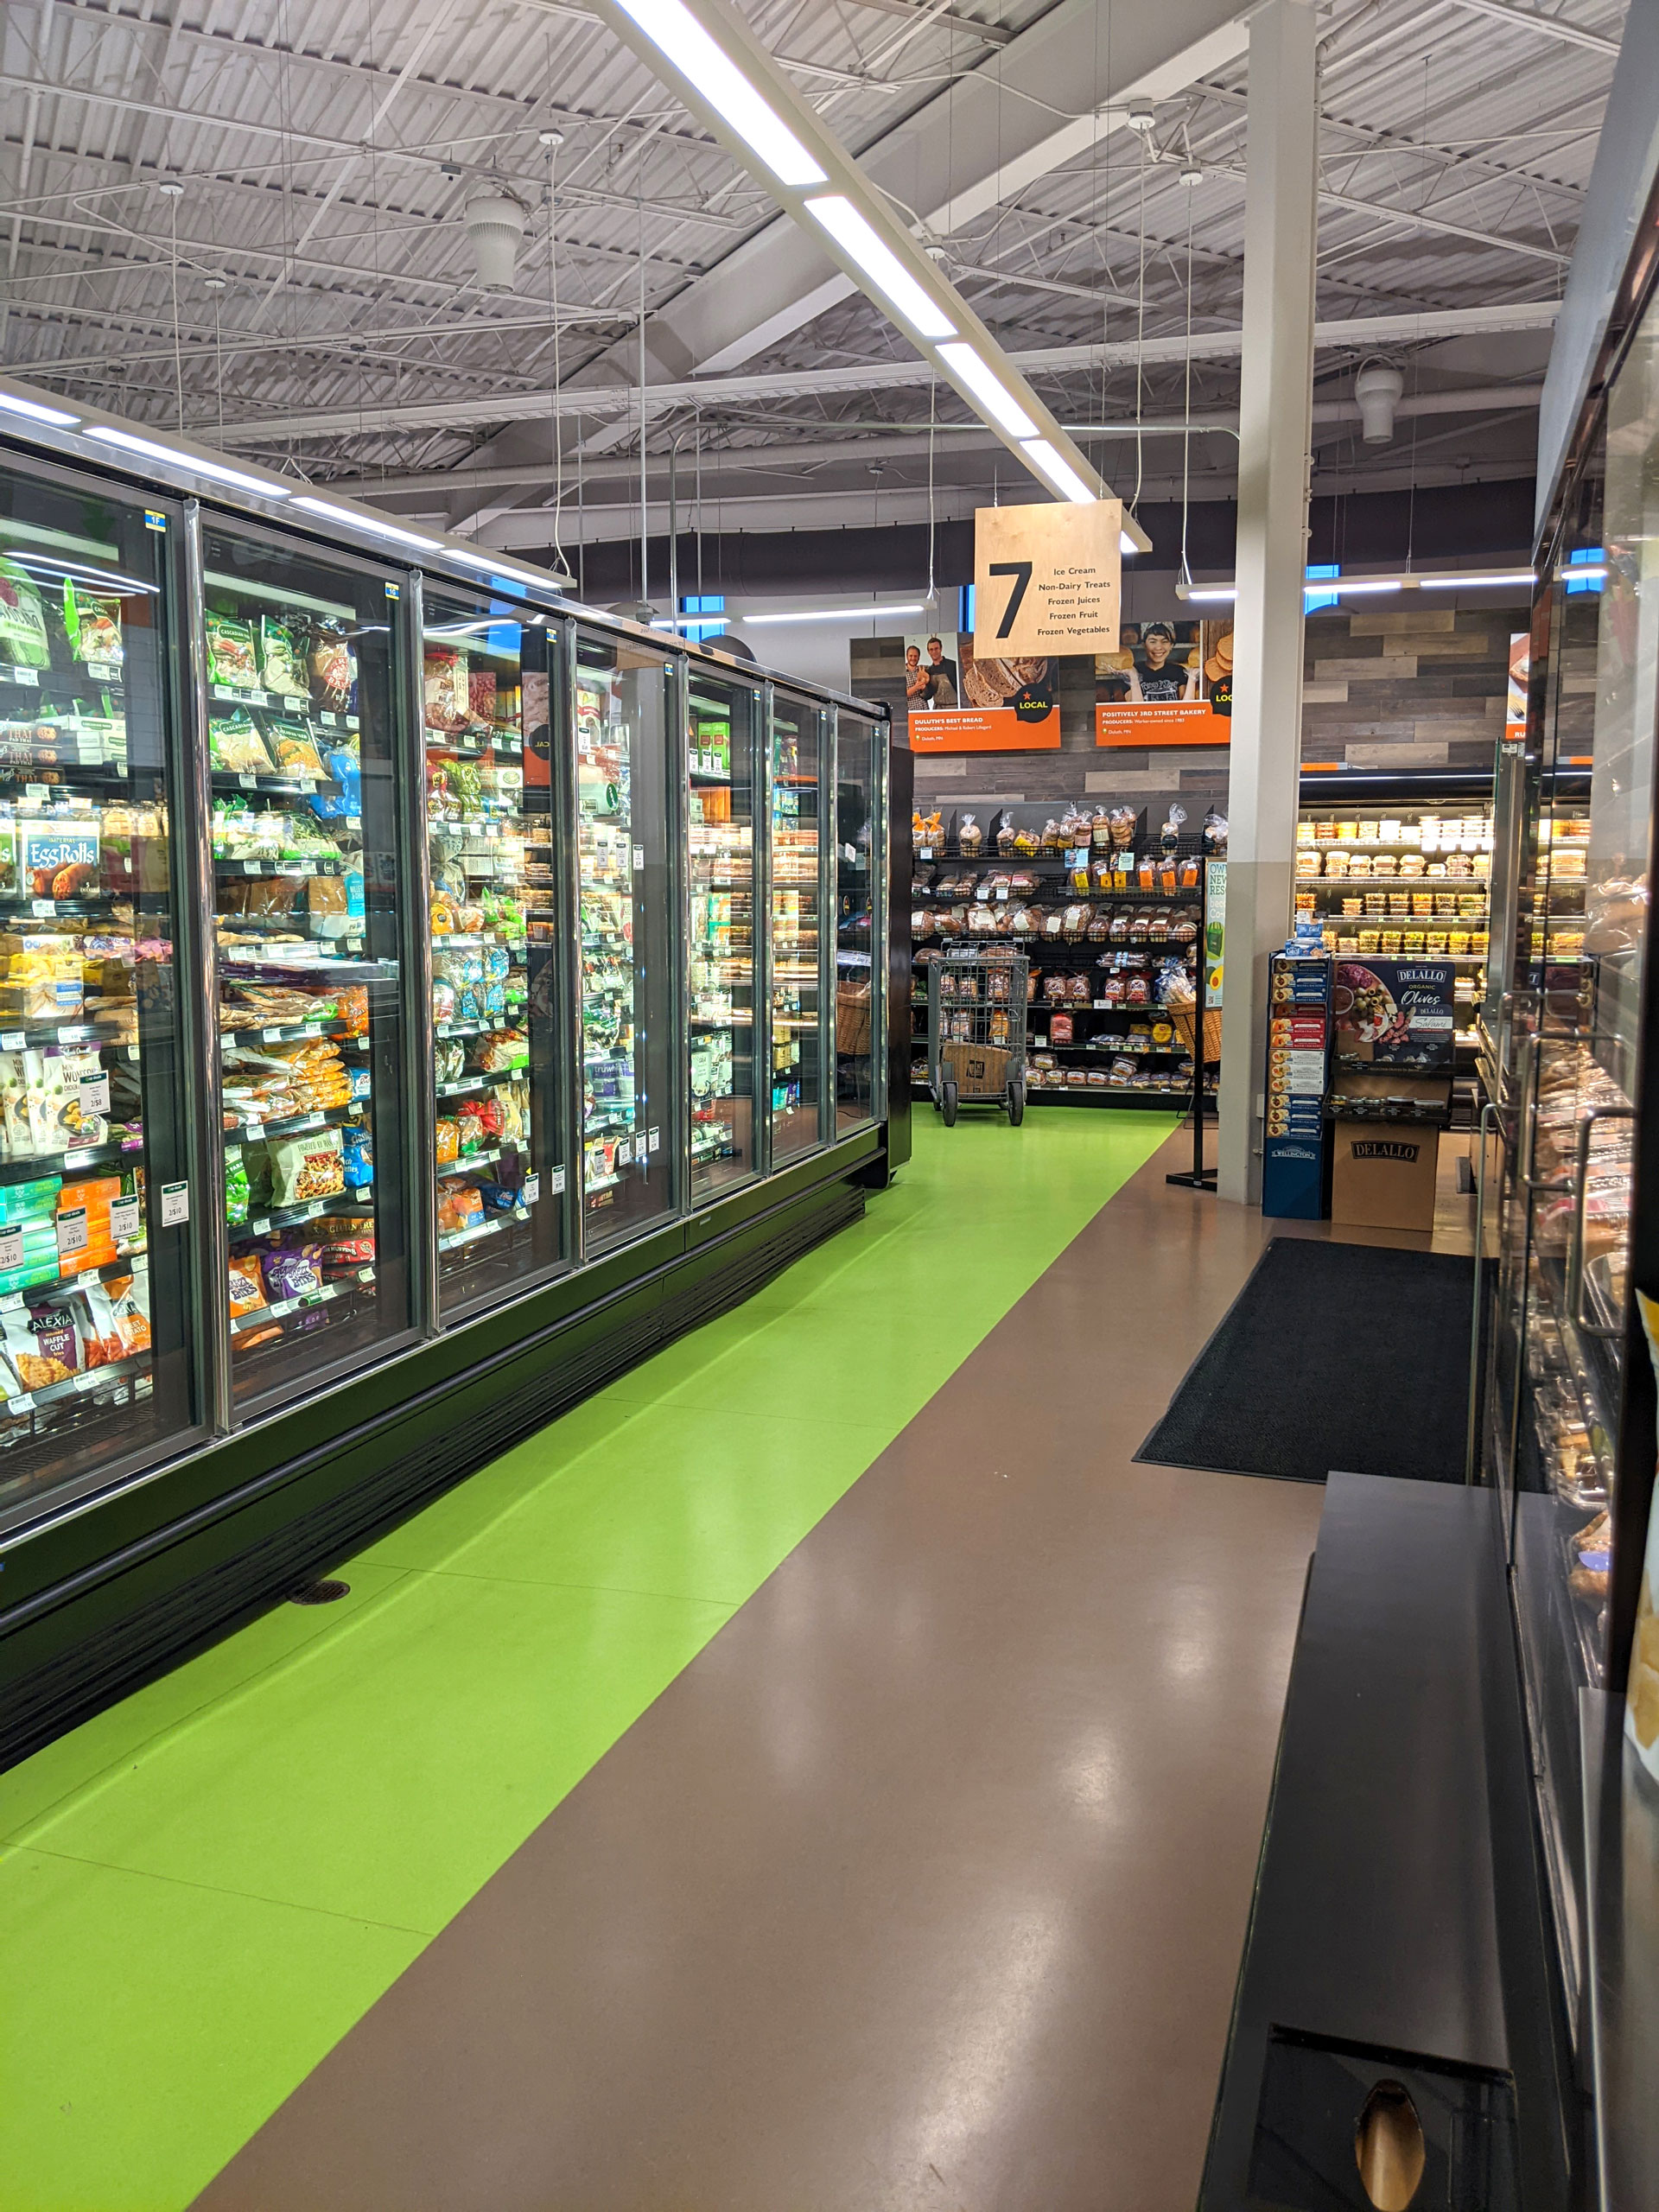 A supermarket aisle with refrigerator units displaying various frozen foods on the left and bakery items or snacks on the right. The brightly lit space has green and brown flooring, and a sign overhead marking aisle 7.